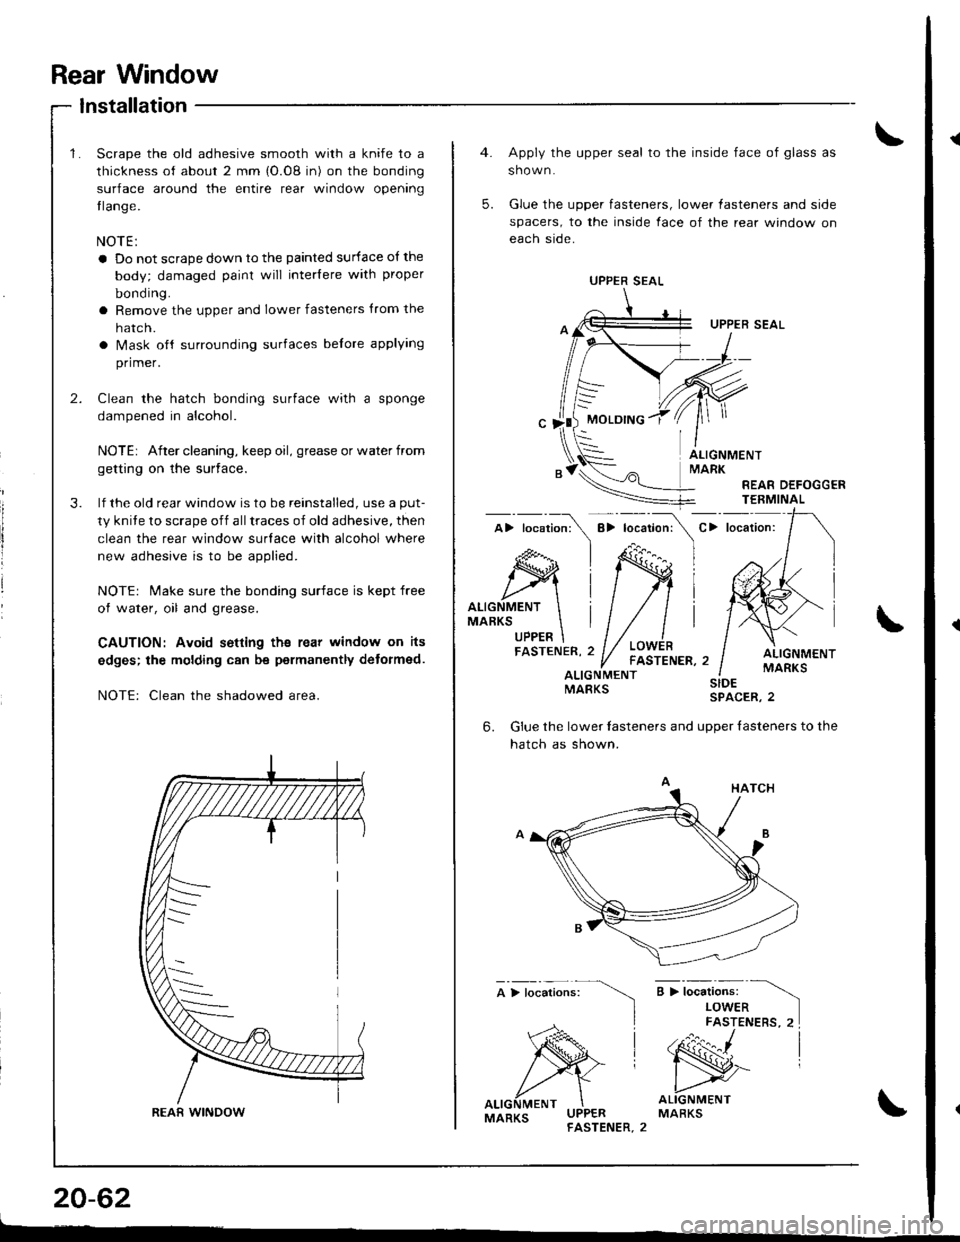 HONDA INTEGRA 1998 4.G Owners Manual Rear Window
{
lnstallation
2.
3.
Scrape the old adhesive smooth with a knife to a
thickness of about 2 mm {O.08 in) on the bonding
surface around the entire rear window opening
tlange.
NOTE:
a Do not 